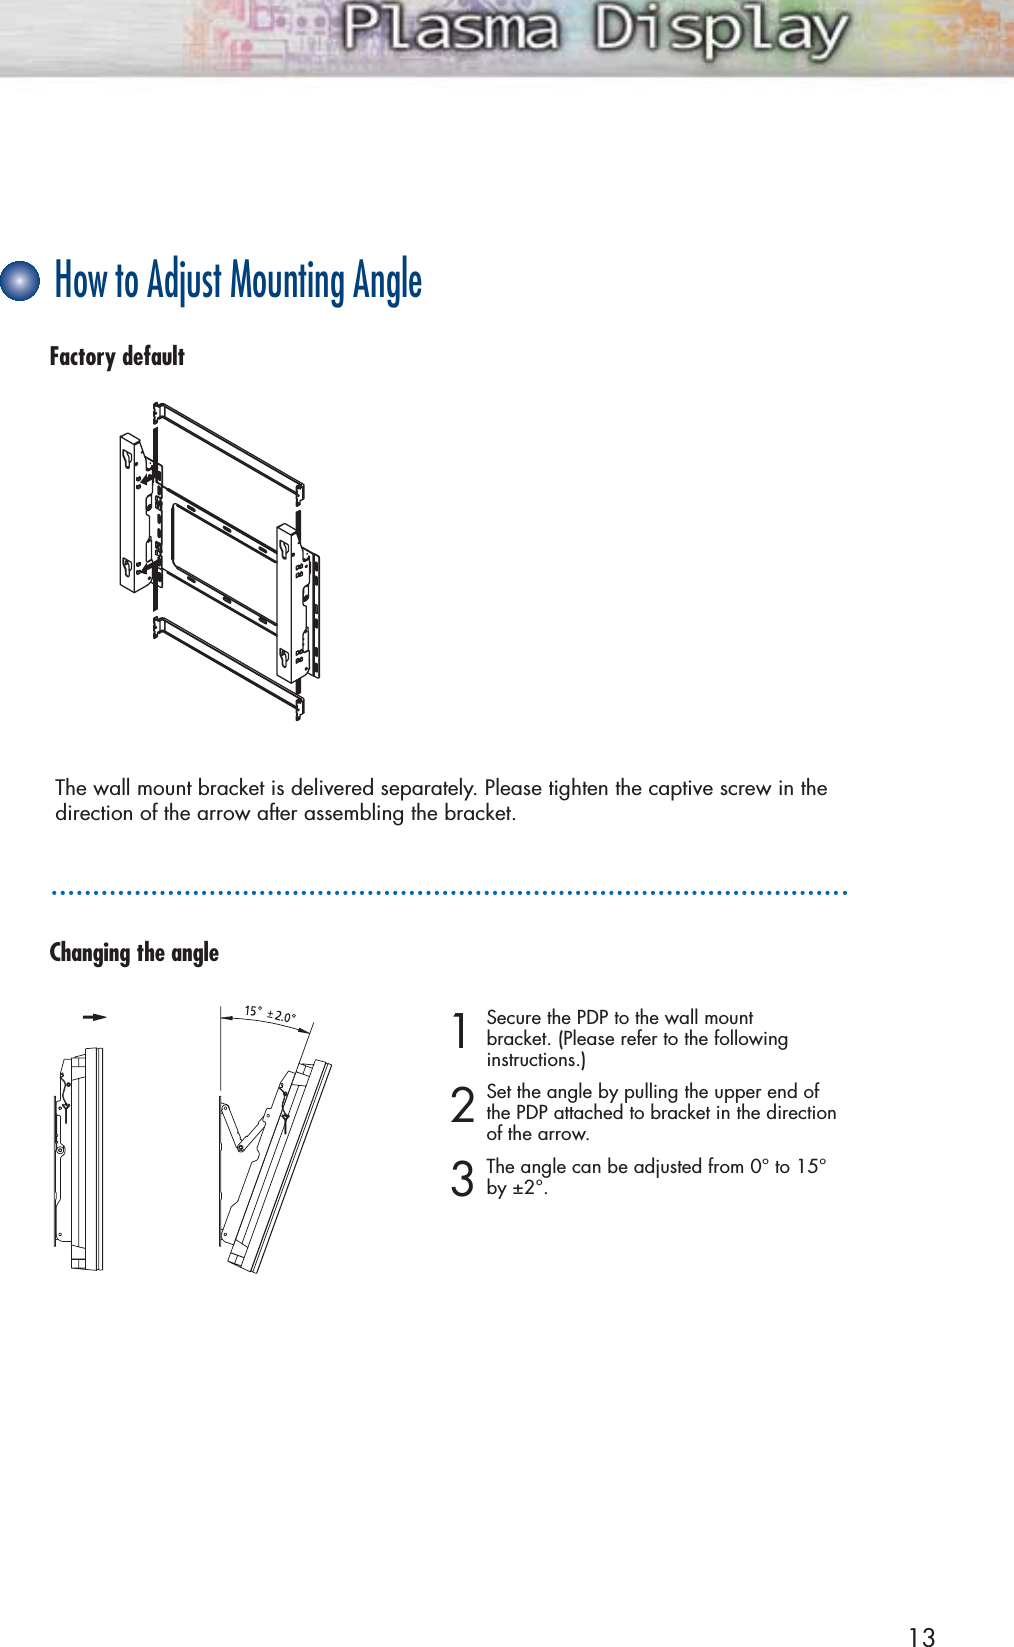 13How to Adjust Mounting AngleFactory defaultThe wall mount bracket is delivered separately. Please tighten the captive screw in thedirection of the arrow after assembling the bracket.1Secure the PDP to the wall mount bracket. (Please refer to the following instructions.)2Set the angle by pulling the upper end of the PDP attached to bracket in the directionof the arrow.3The angle can be adjusted from 0° to 15°by ±2°.Changing the angle